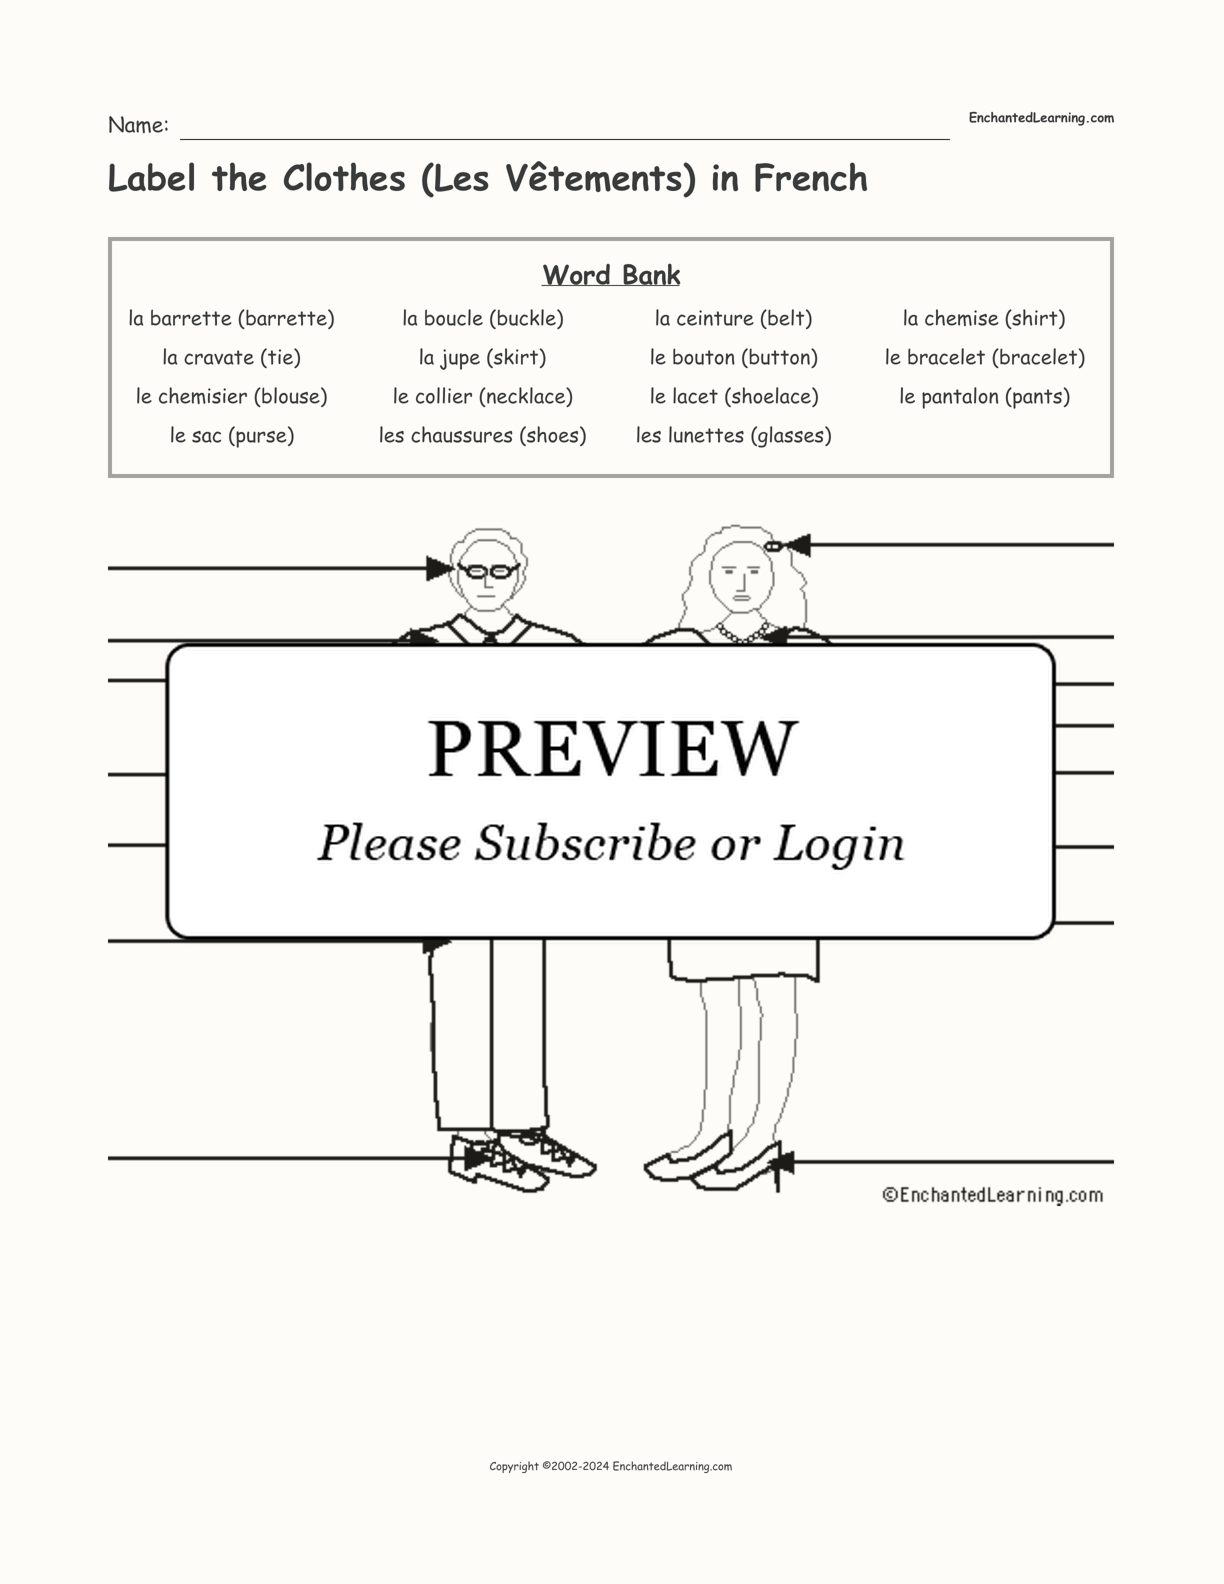 Label the Clothes (Les Vêtements) in French interactive worksheet page 1